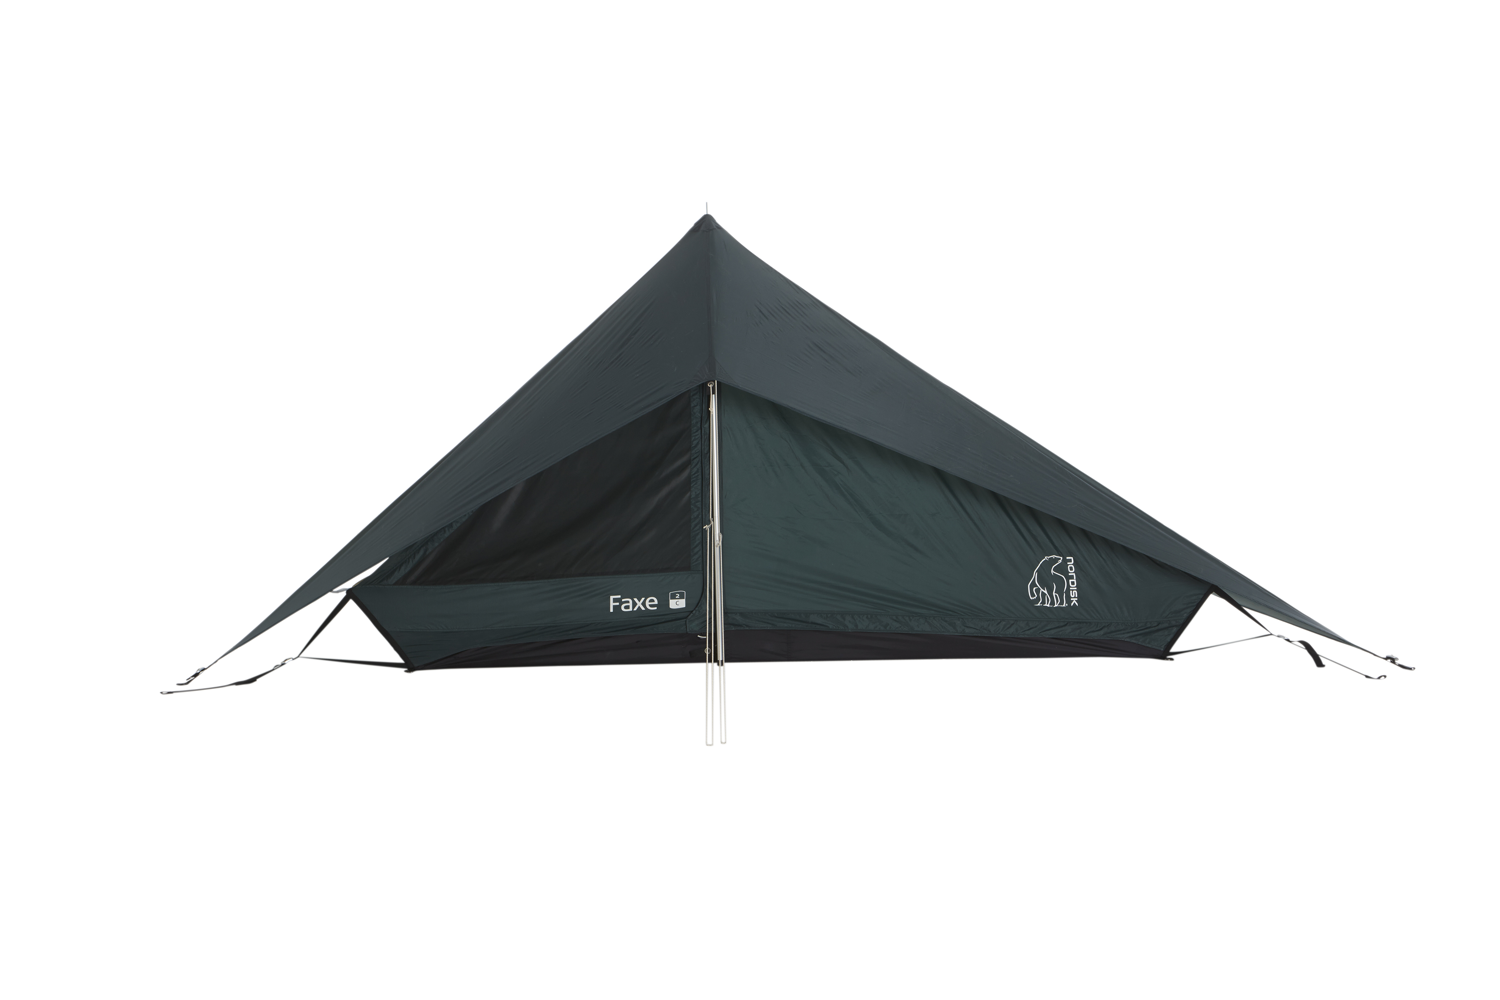 Nordisk - Faxe 2 of 4 tent - € 469,95 of € 599,99